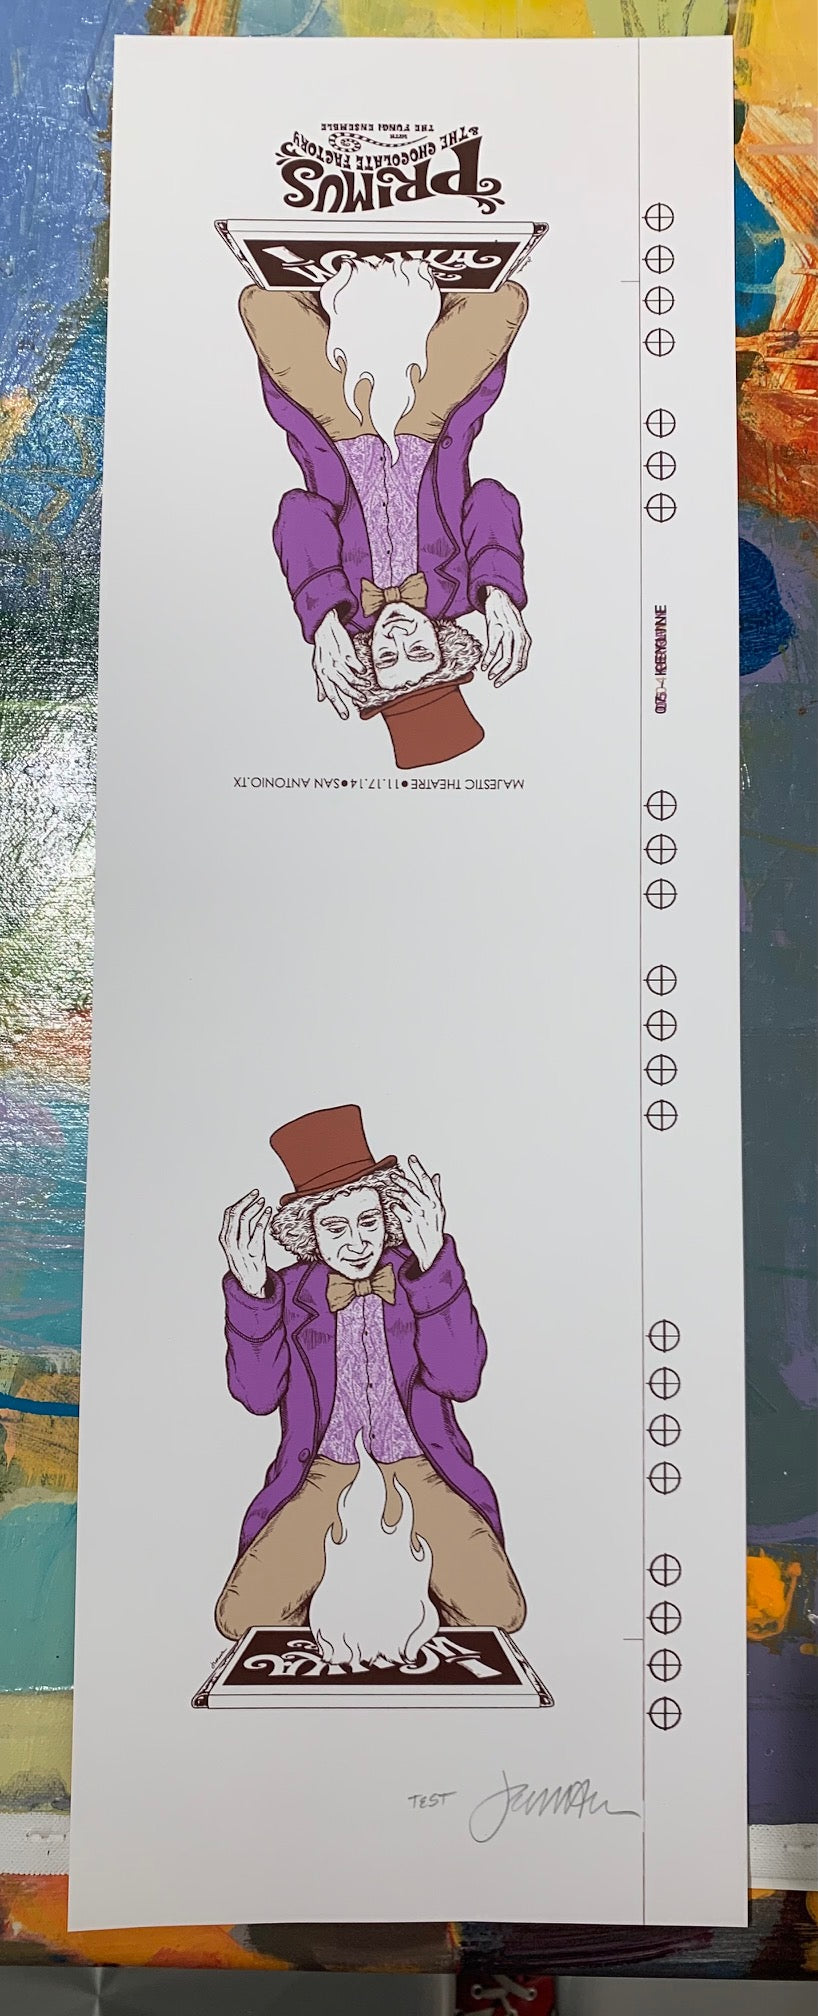 Willy Wonka Experience/Primus - RARE TEST Handbill - White Stock with Registration Double Sided